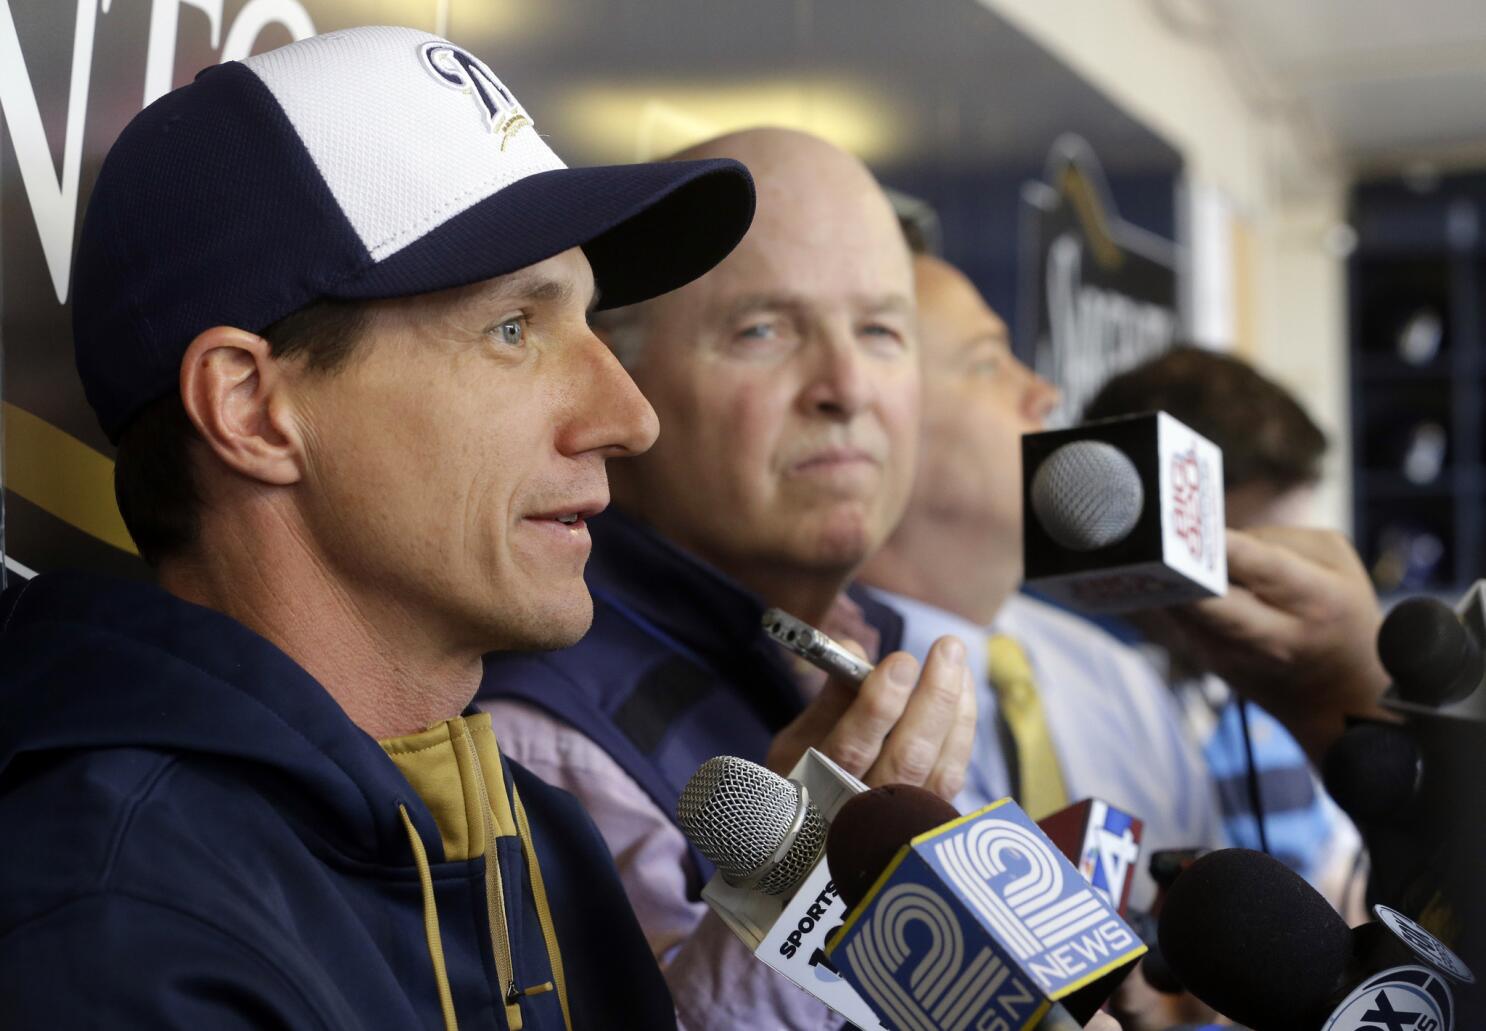 Brewers manager Craig Counsell featured guest for La Crosse